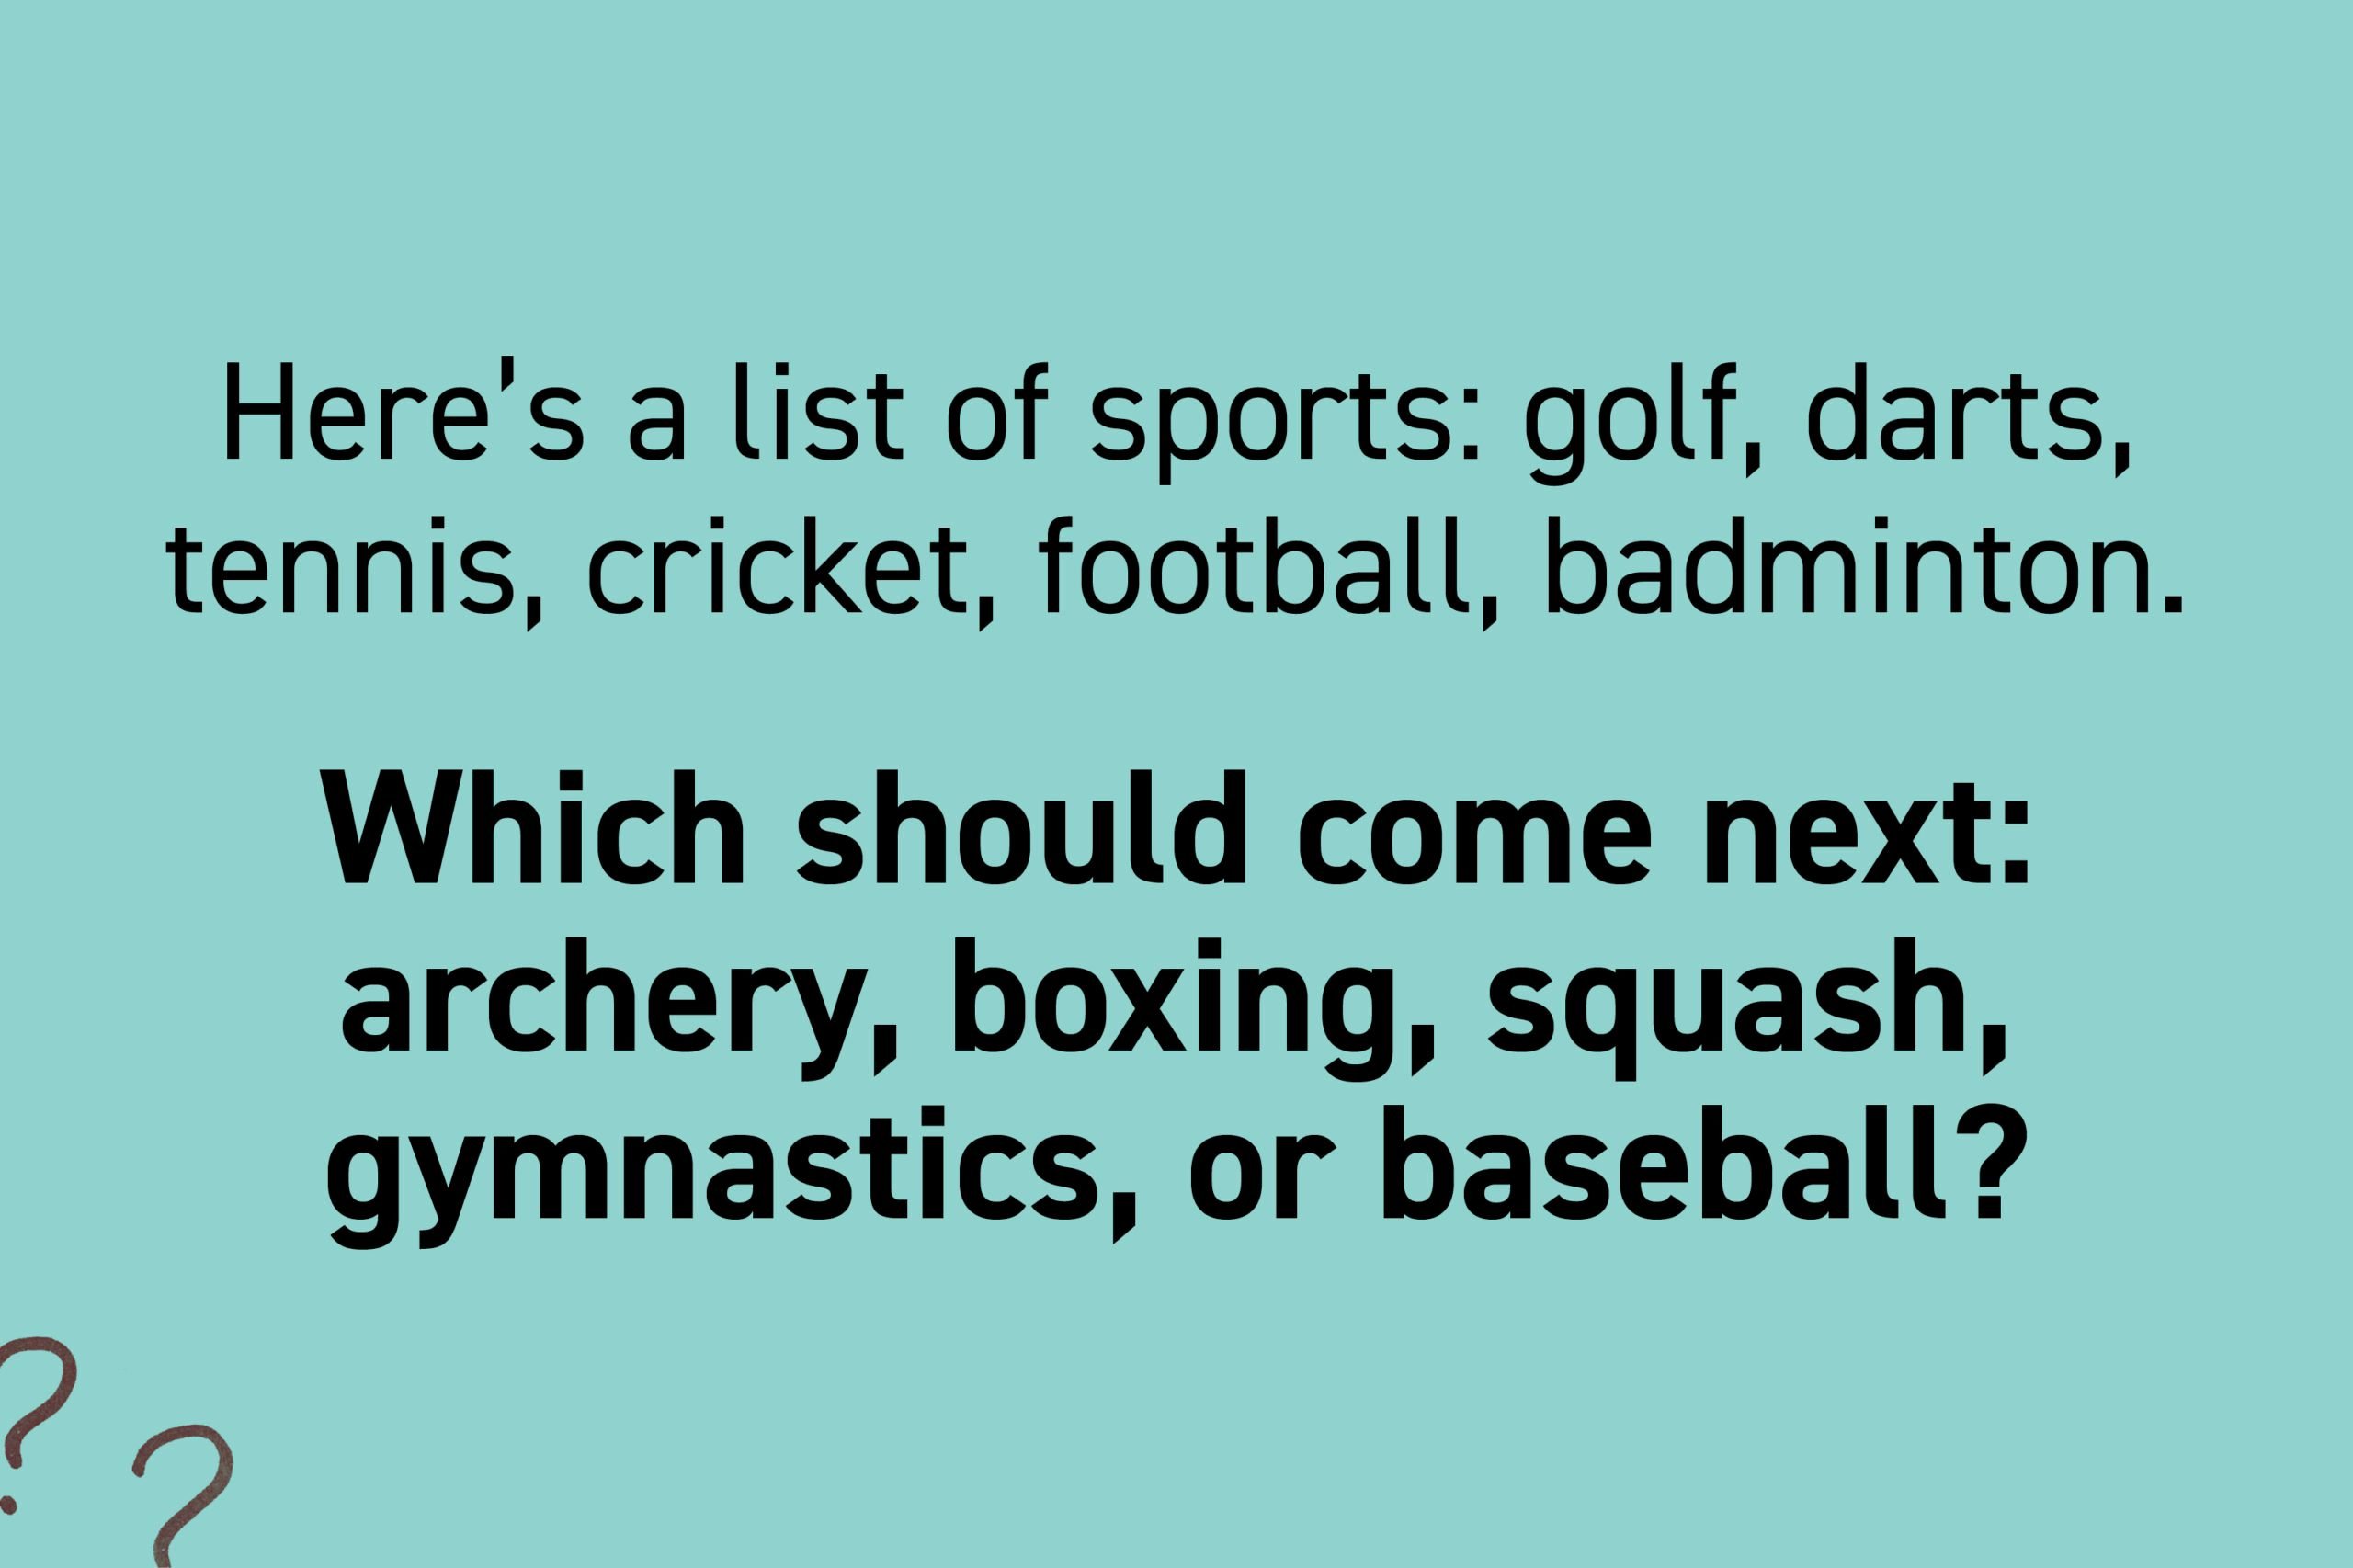 Here's a list of sports: golf, darts, tennis, cricket, football, badminton. Which should come next: archery, boxing, squash, gymnastics, or baseball?